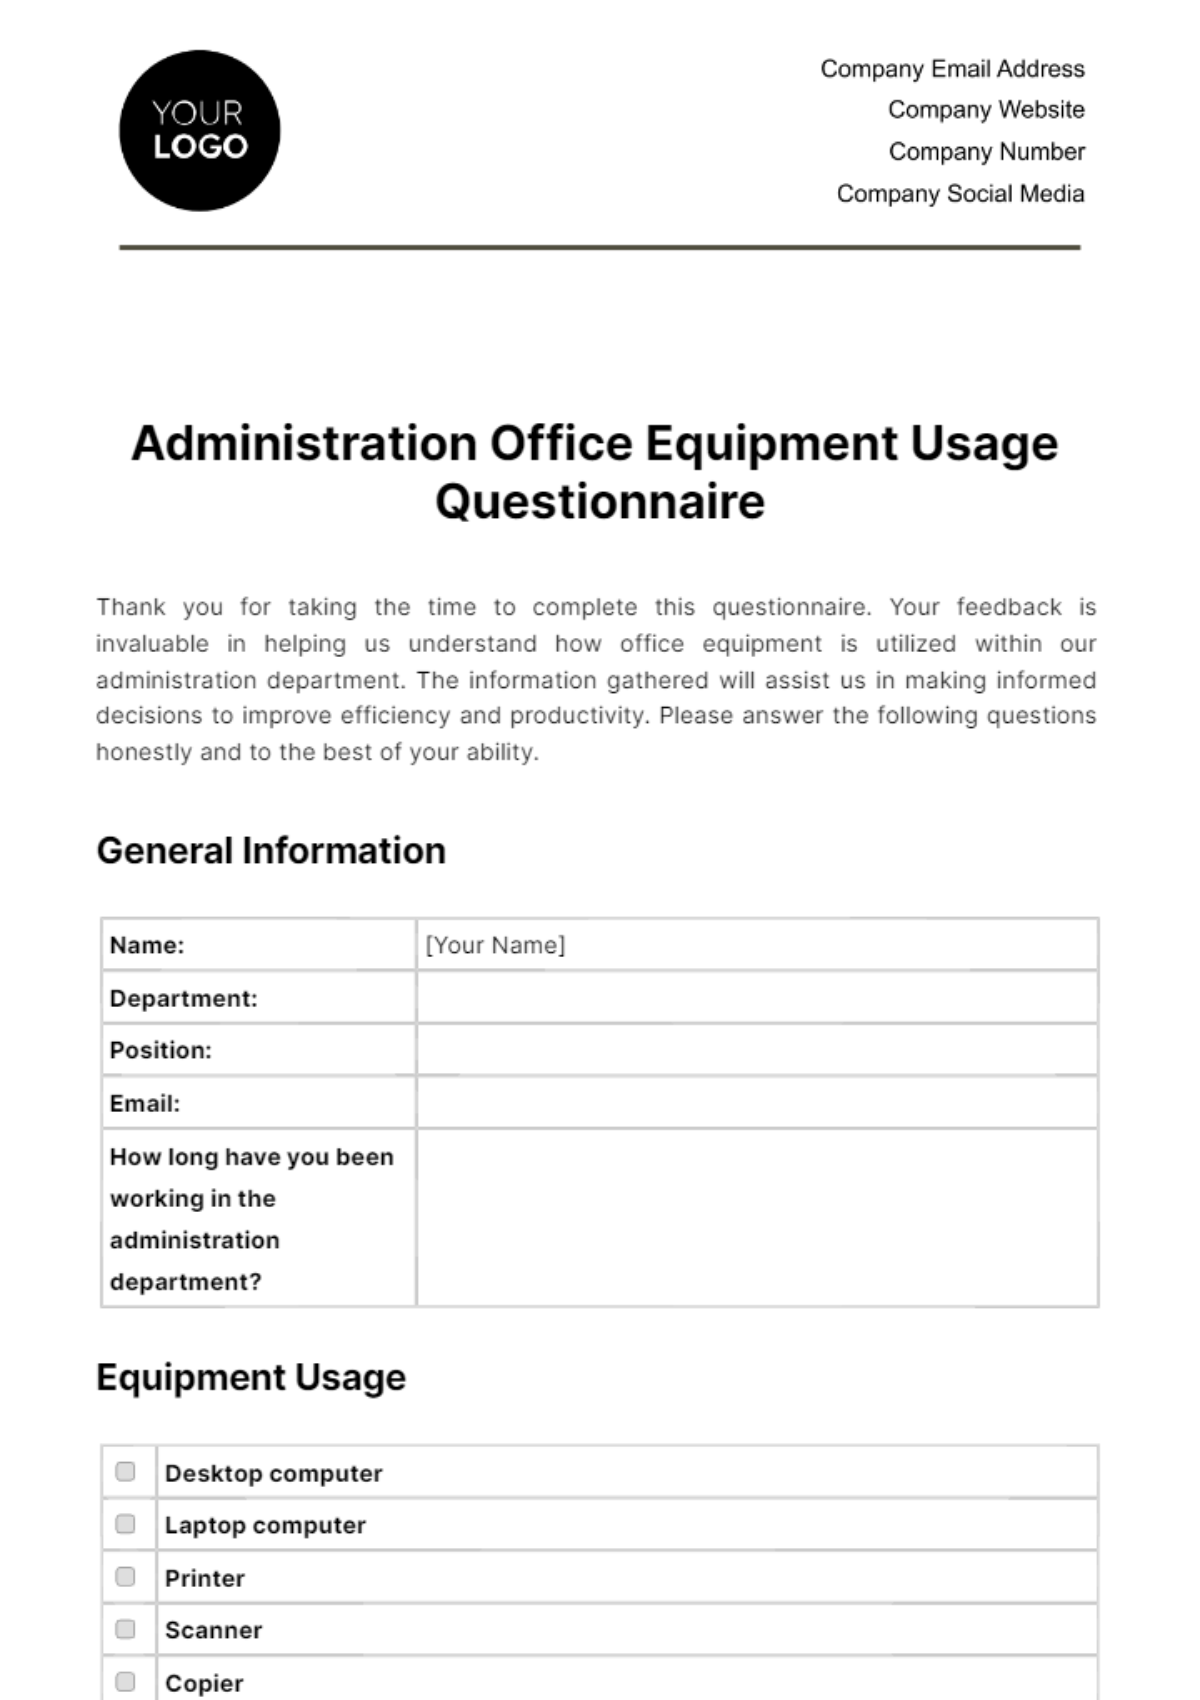 Administration Office Equipment Usage Questionnaire Template